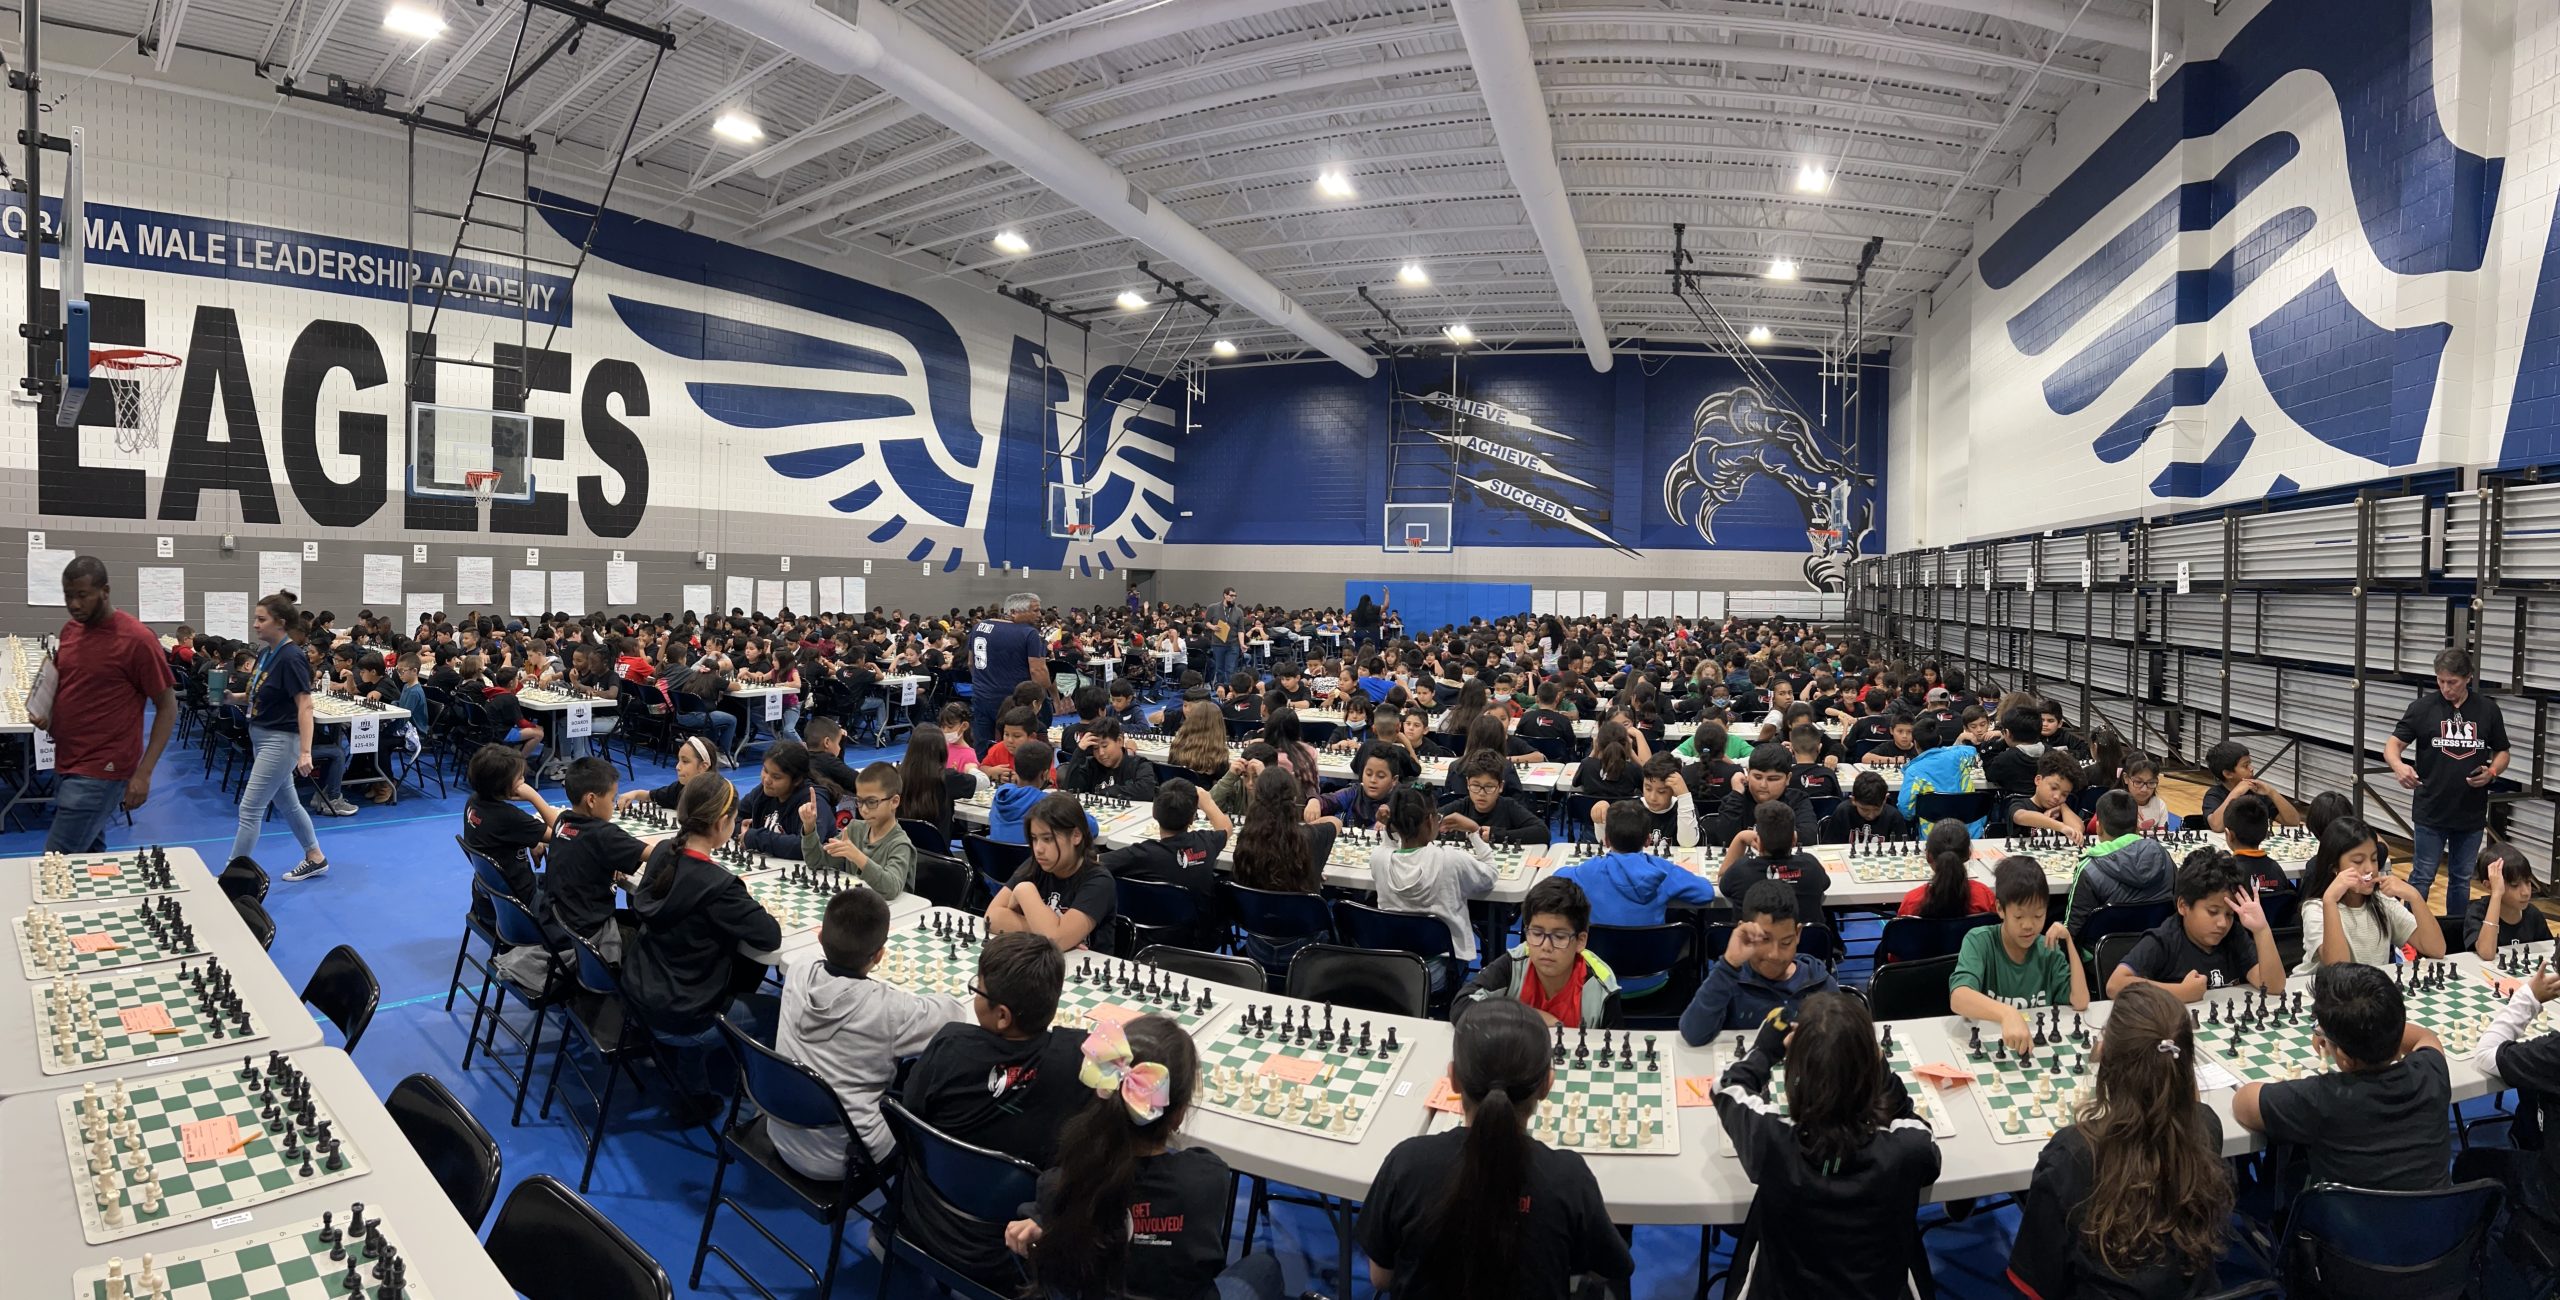 Dallas ISD chess tournaments hit recordbreaking numbers of